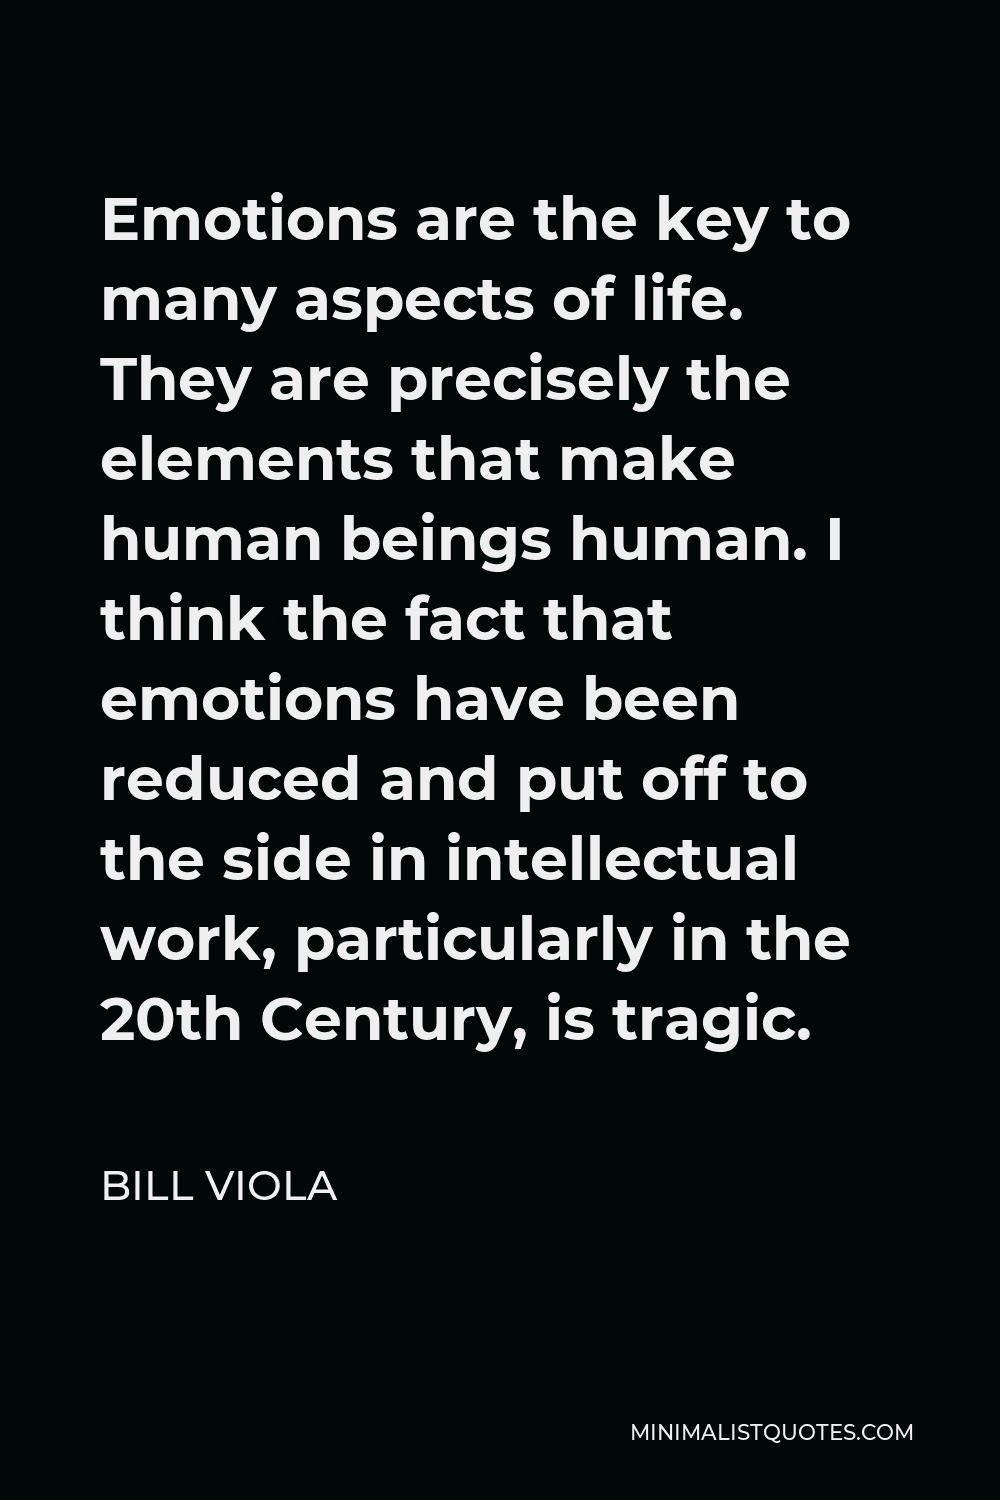 Bill Viola Quote - Emotions are the key to many aspects of life. They are precisely the elements that make human beings human. I think the fact that emotions have been reduced and put off to the side in intellectual work, particularly in the 20th Century, is tragic.